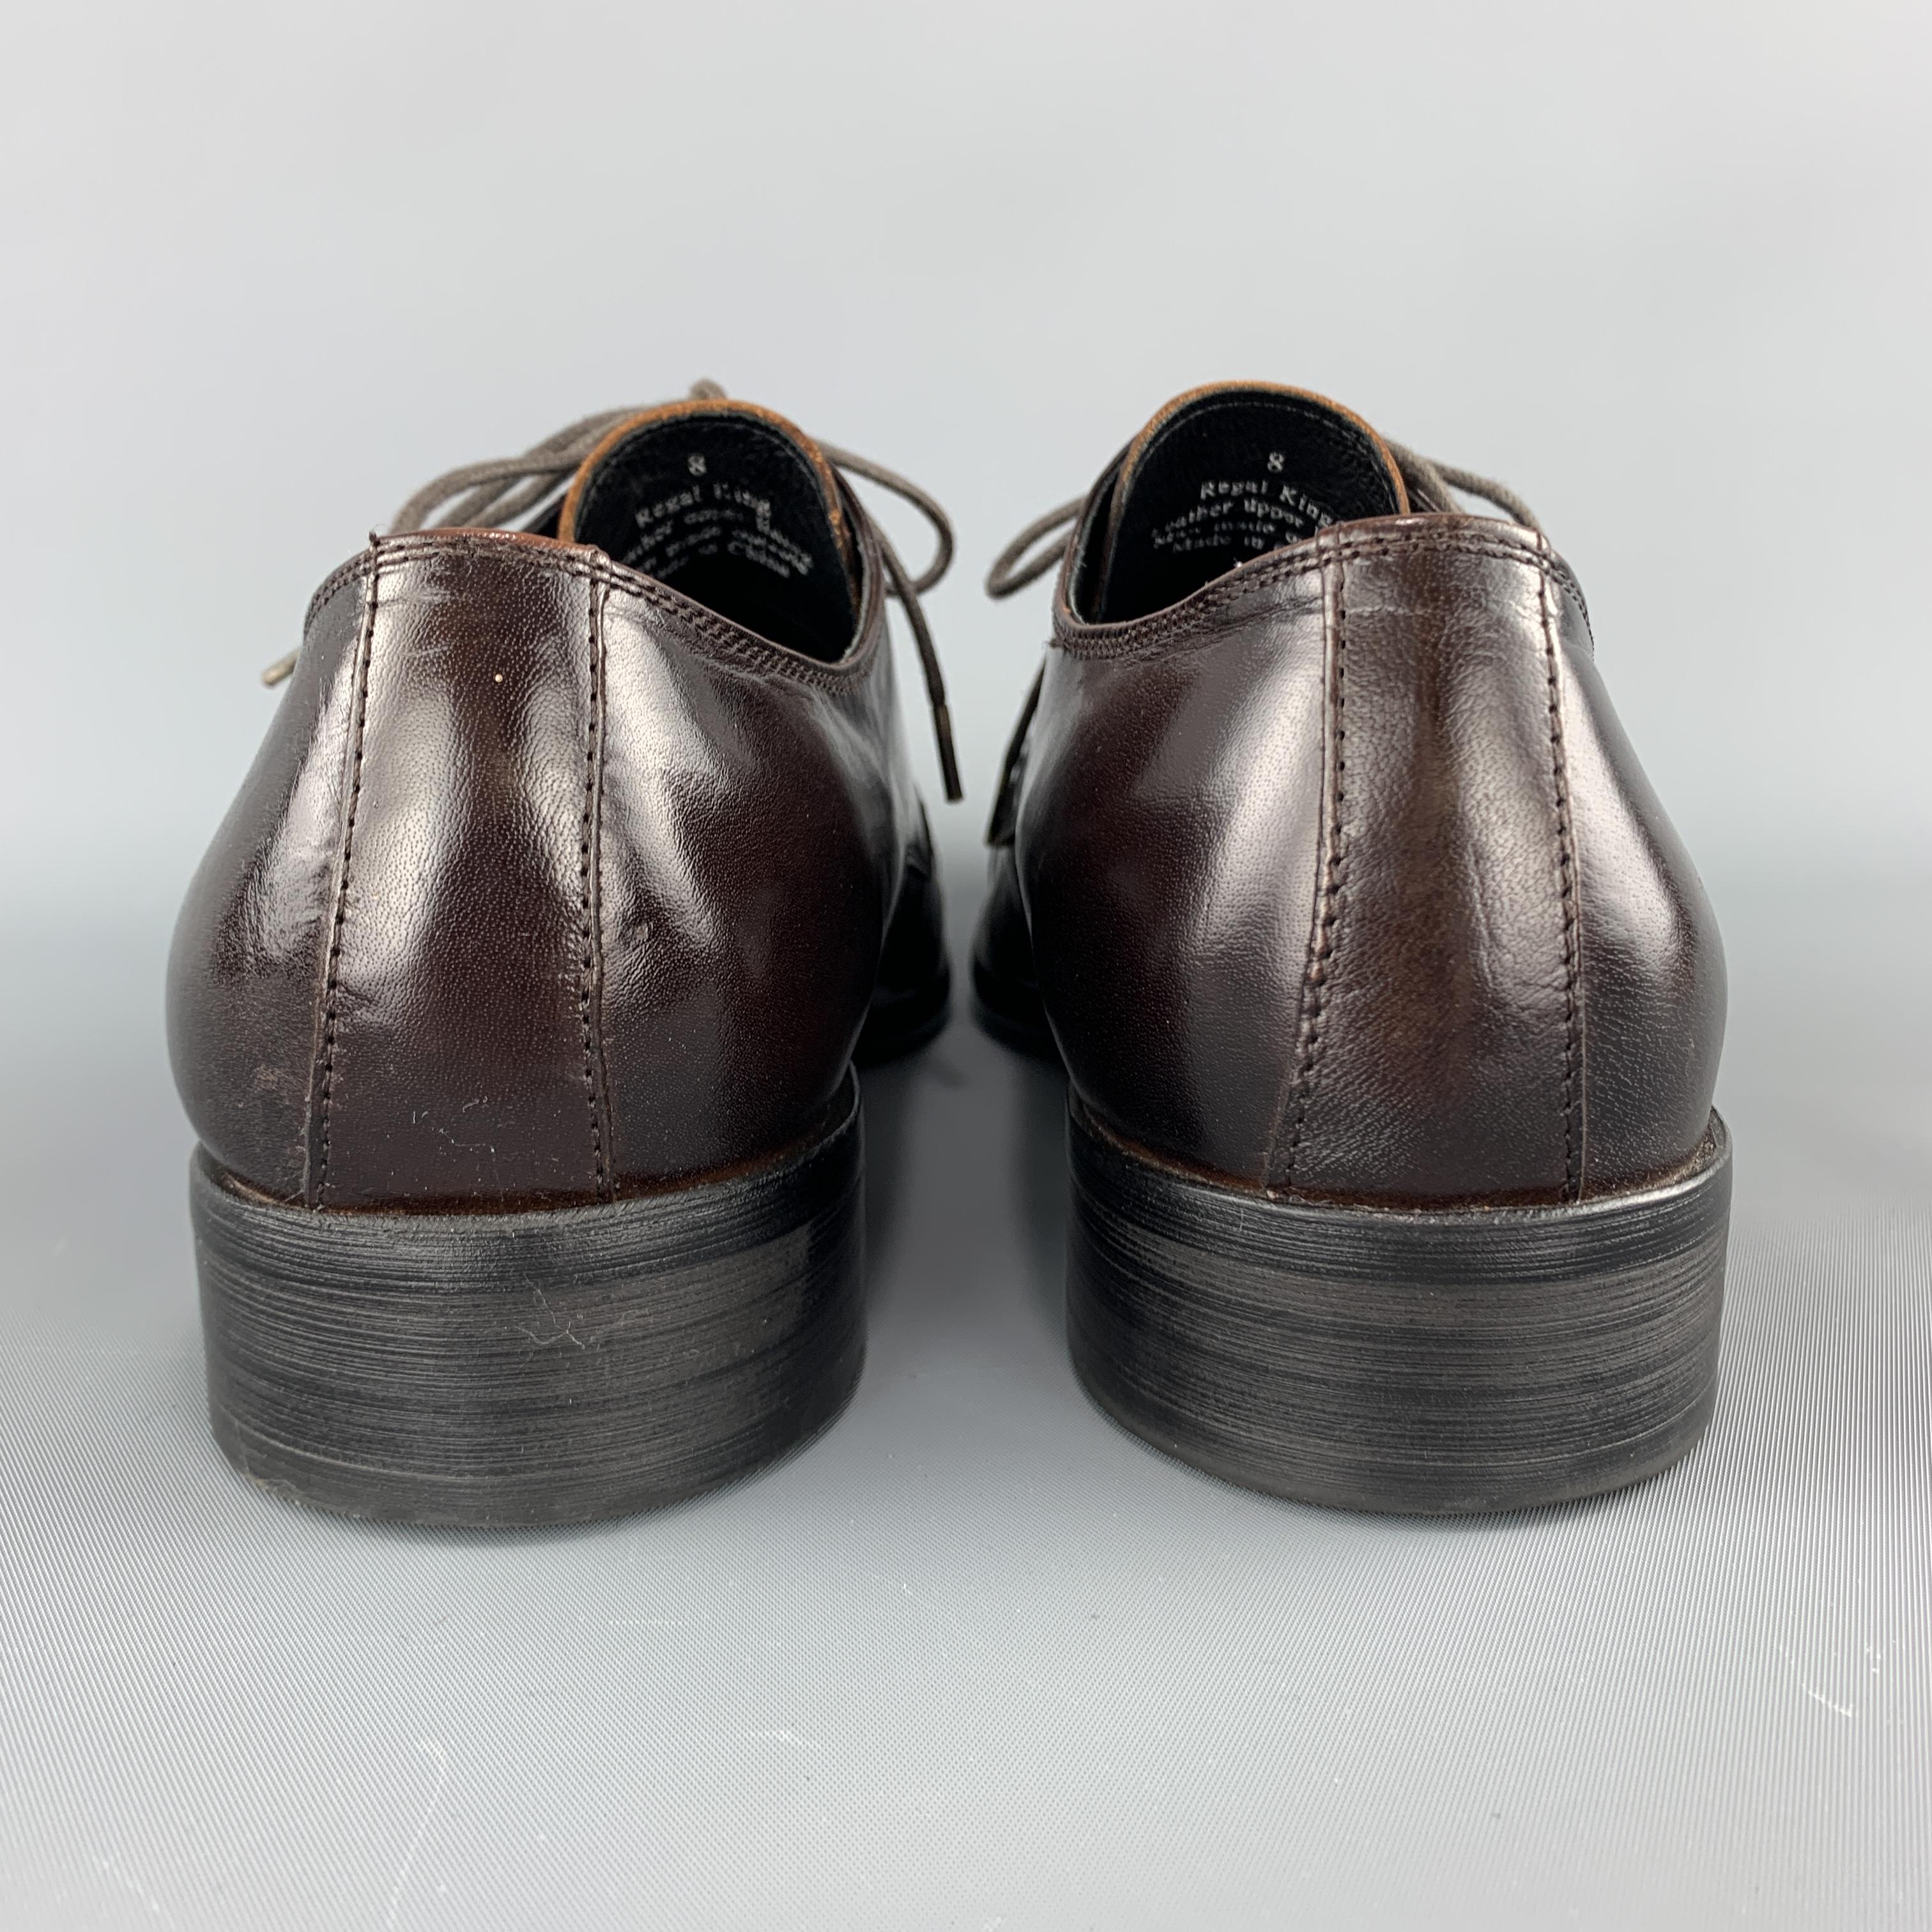 KENNETH COLE Size 8 Dark Brown Leather Squared Toe Lace Up In Good Condition For Sale In San Francisco, CA